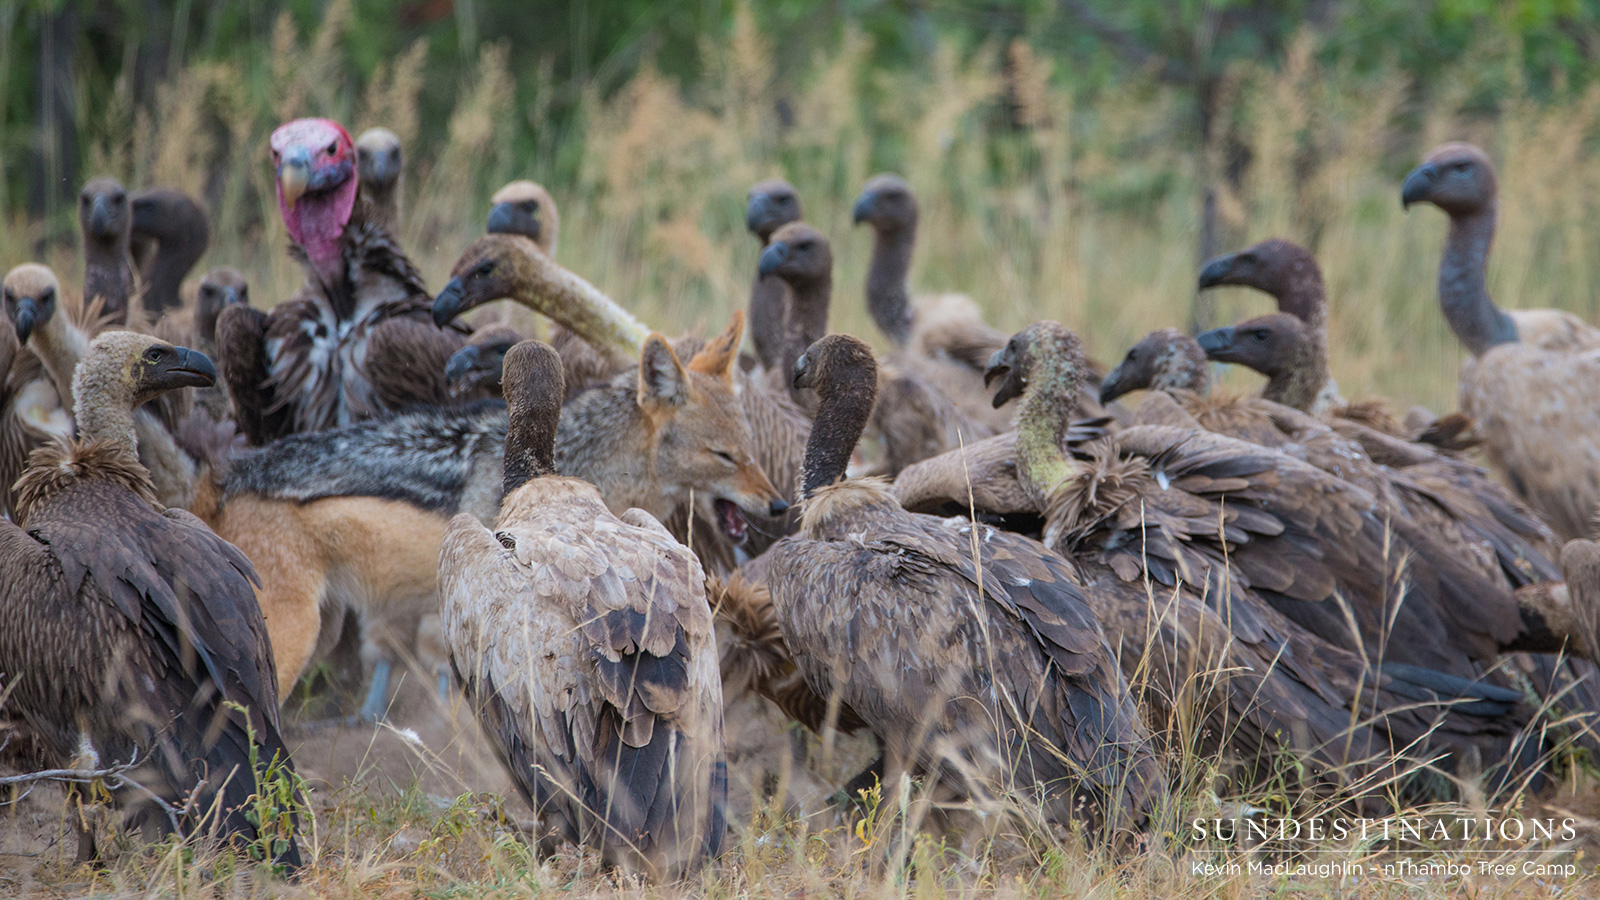 nThambo Hyena and Vultures